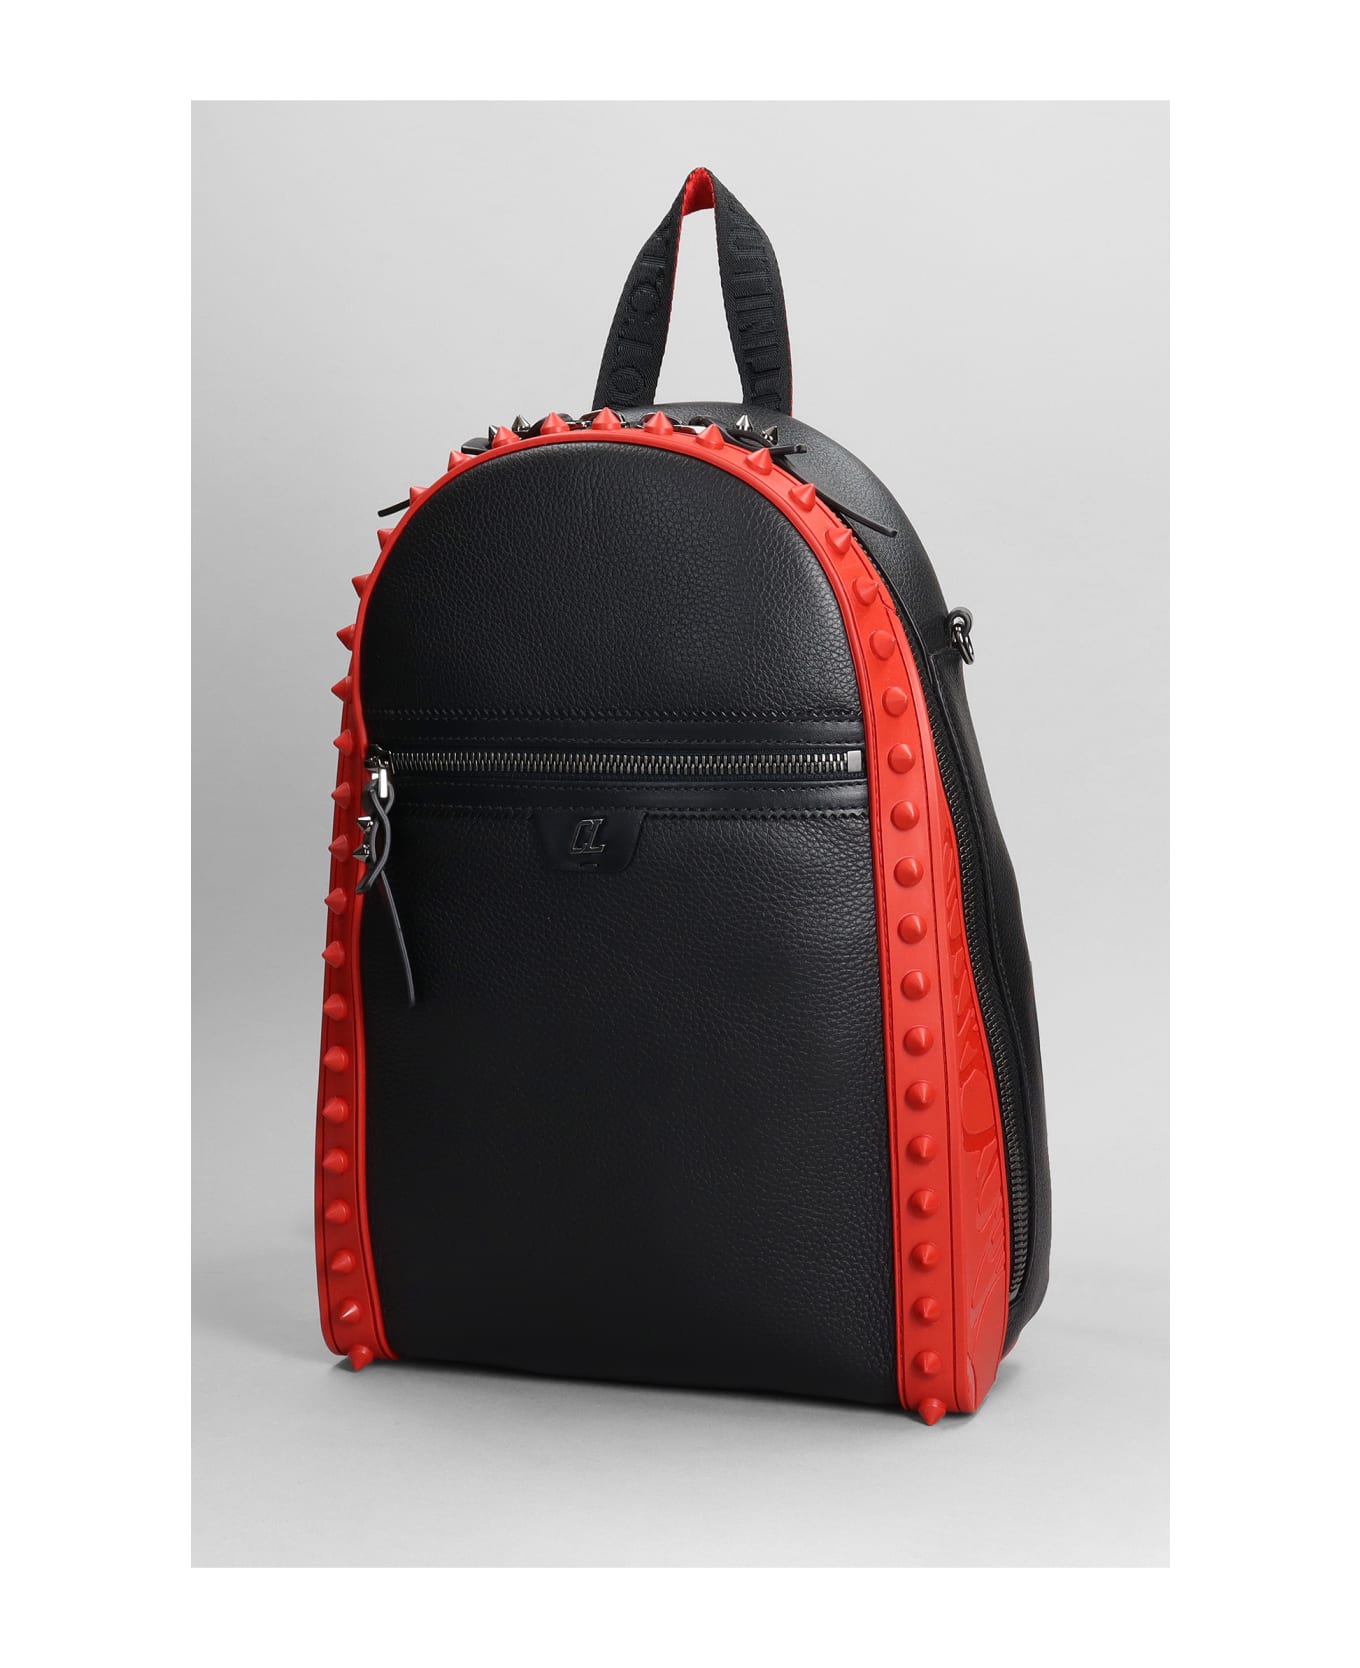 Christian Louboutin Backpack In Black Leather - black バックパック